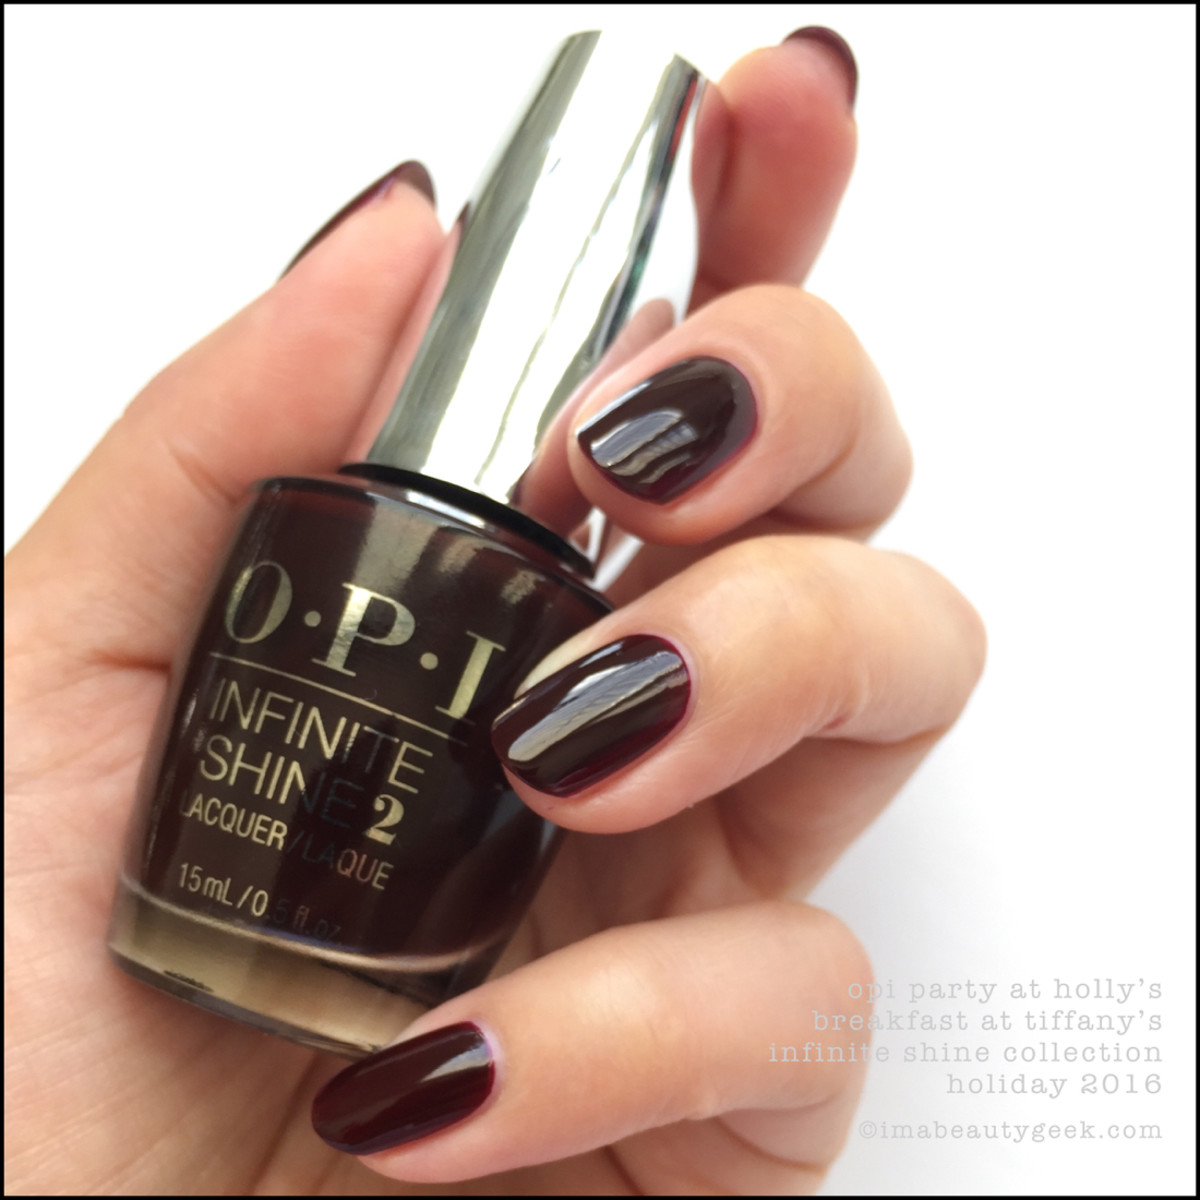 OPI Party at Hollys Infinite Shine_OPI Breakfast at Tiffanys Swatches Review Holiday 2016